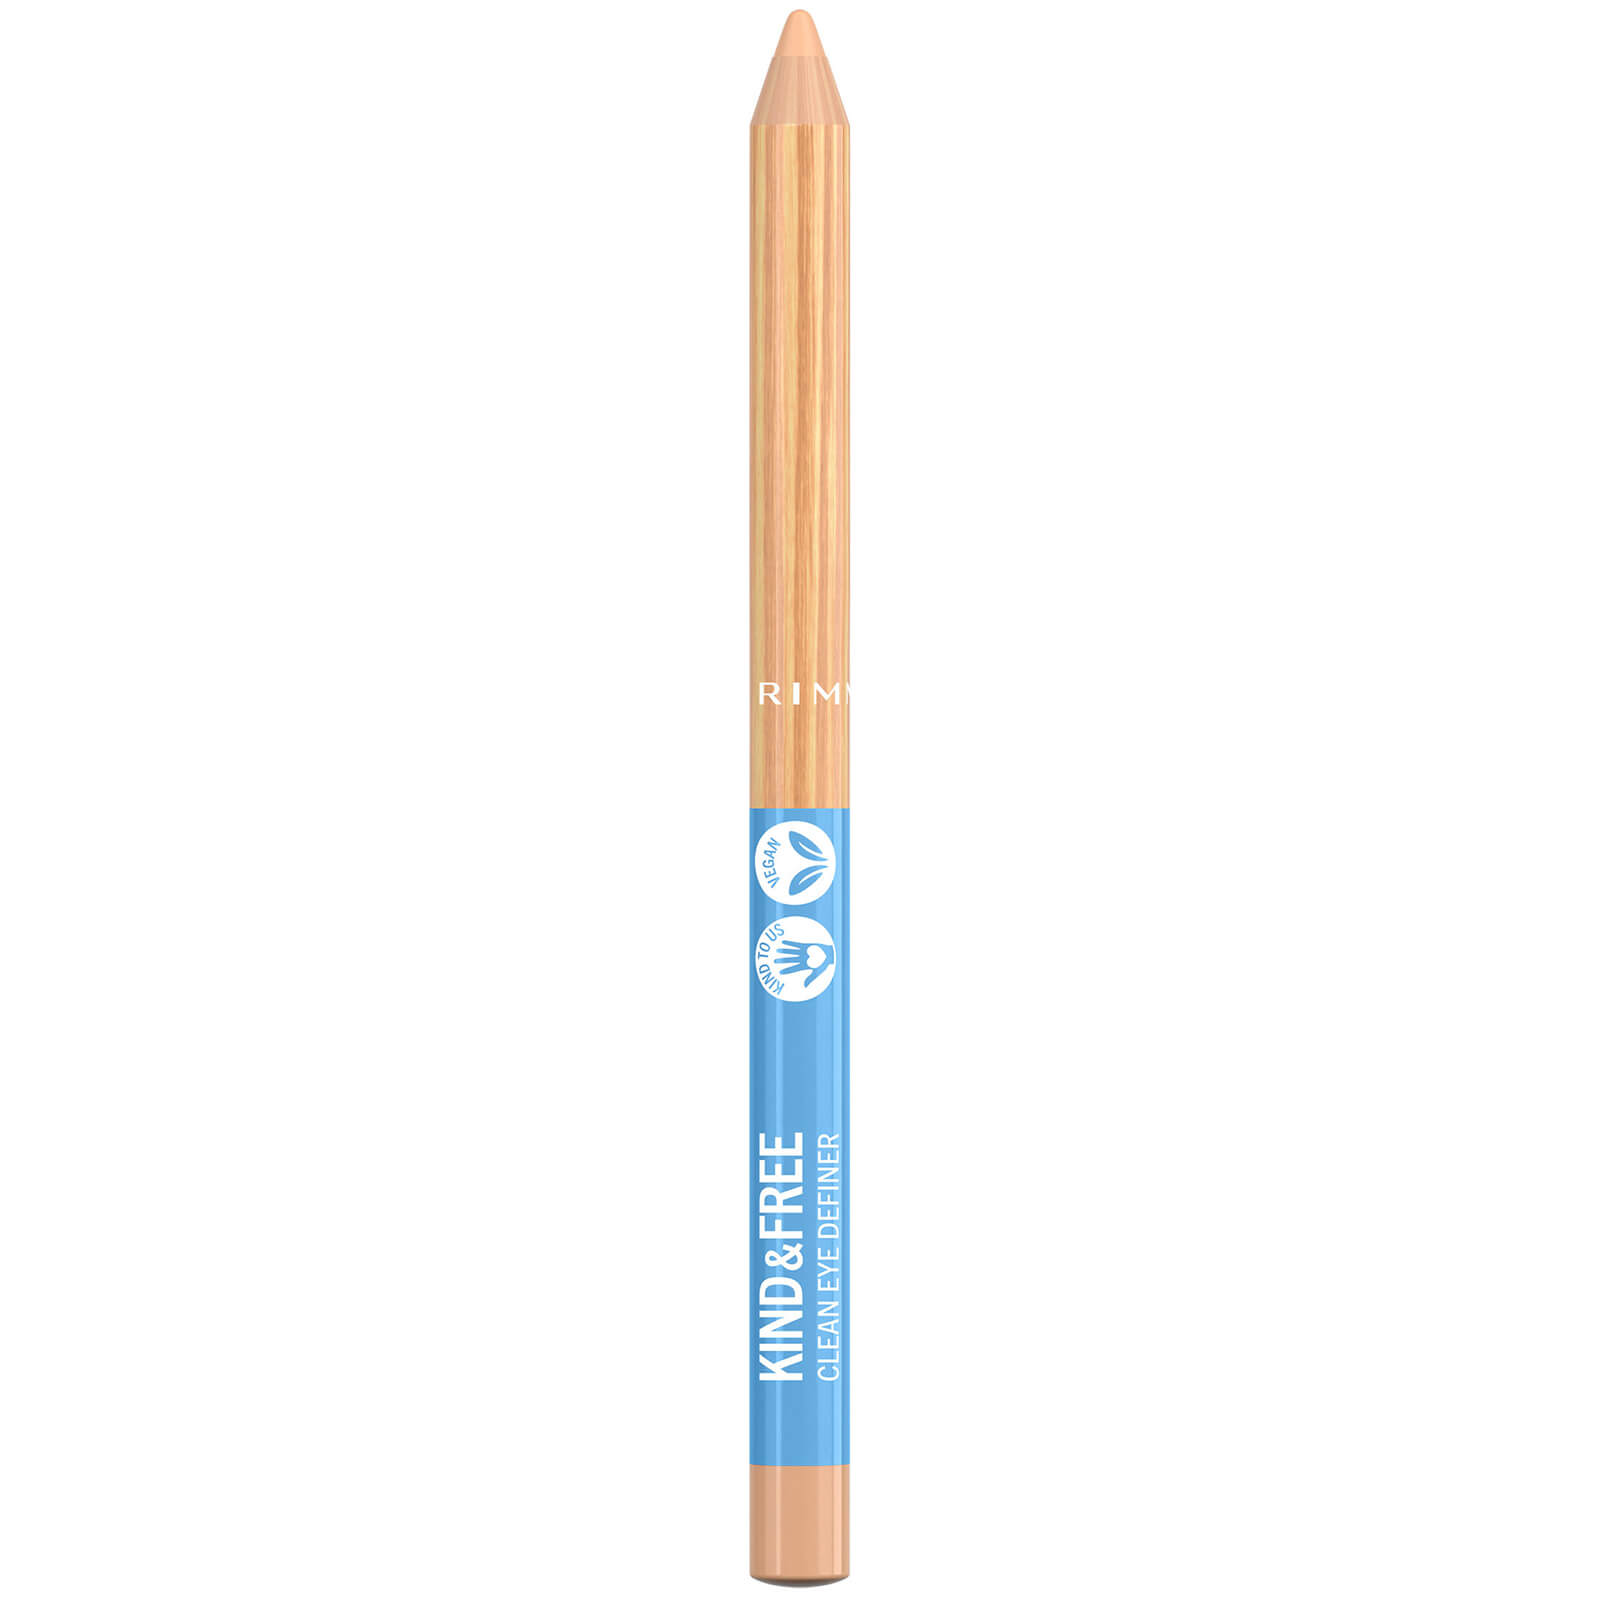 Rimmel London Kind & Free Clean Eyeliner Pencil 1.1g (Various Shades) - 005 Creamy White